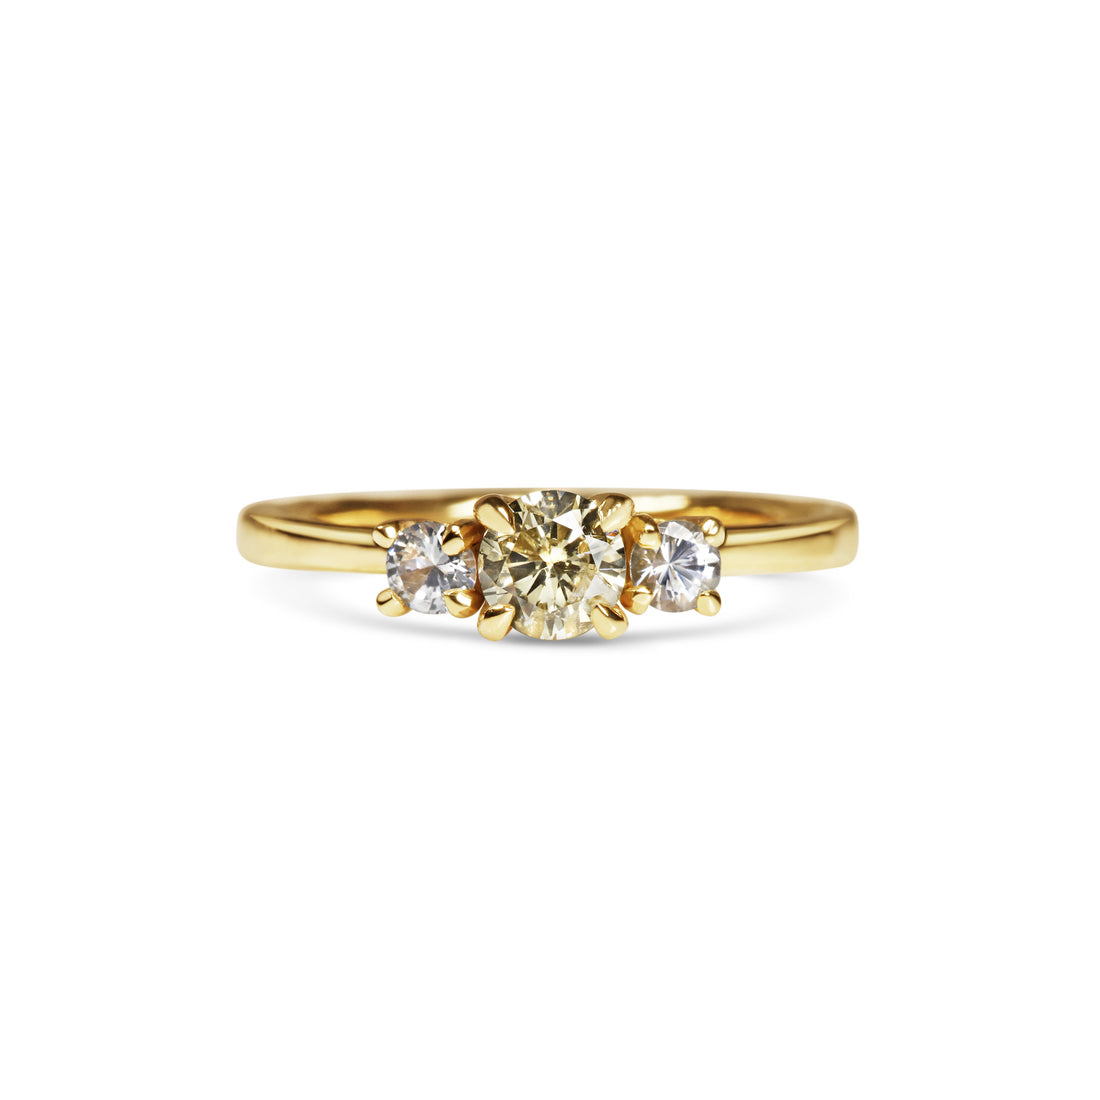  Yellow Diamond Trilogy Ring by Michelle Oh | The Cut London